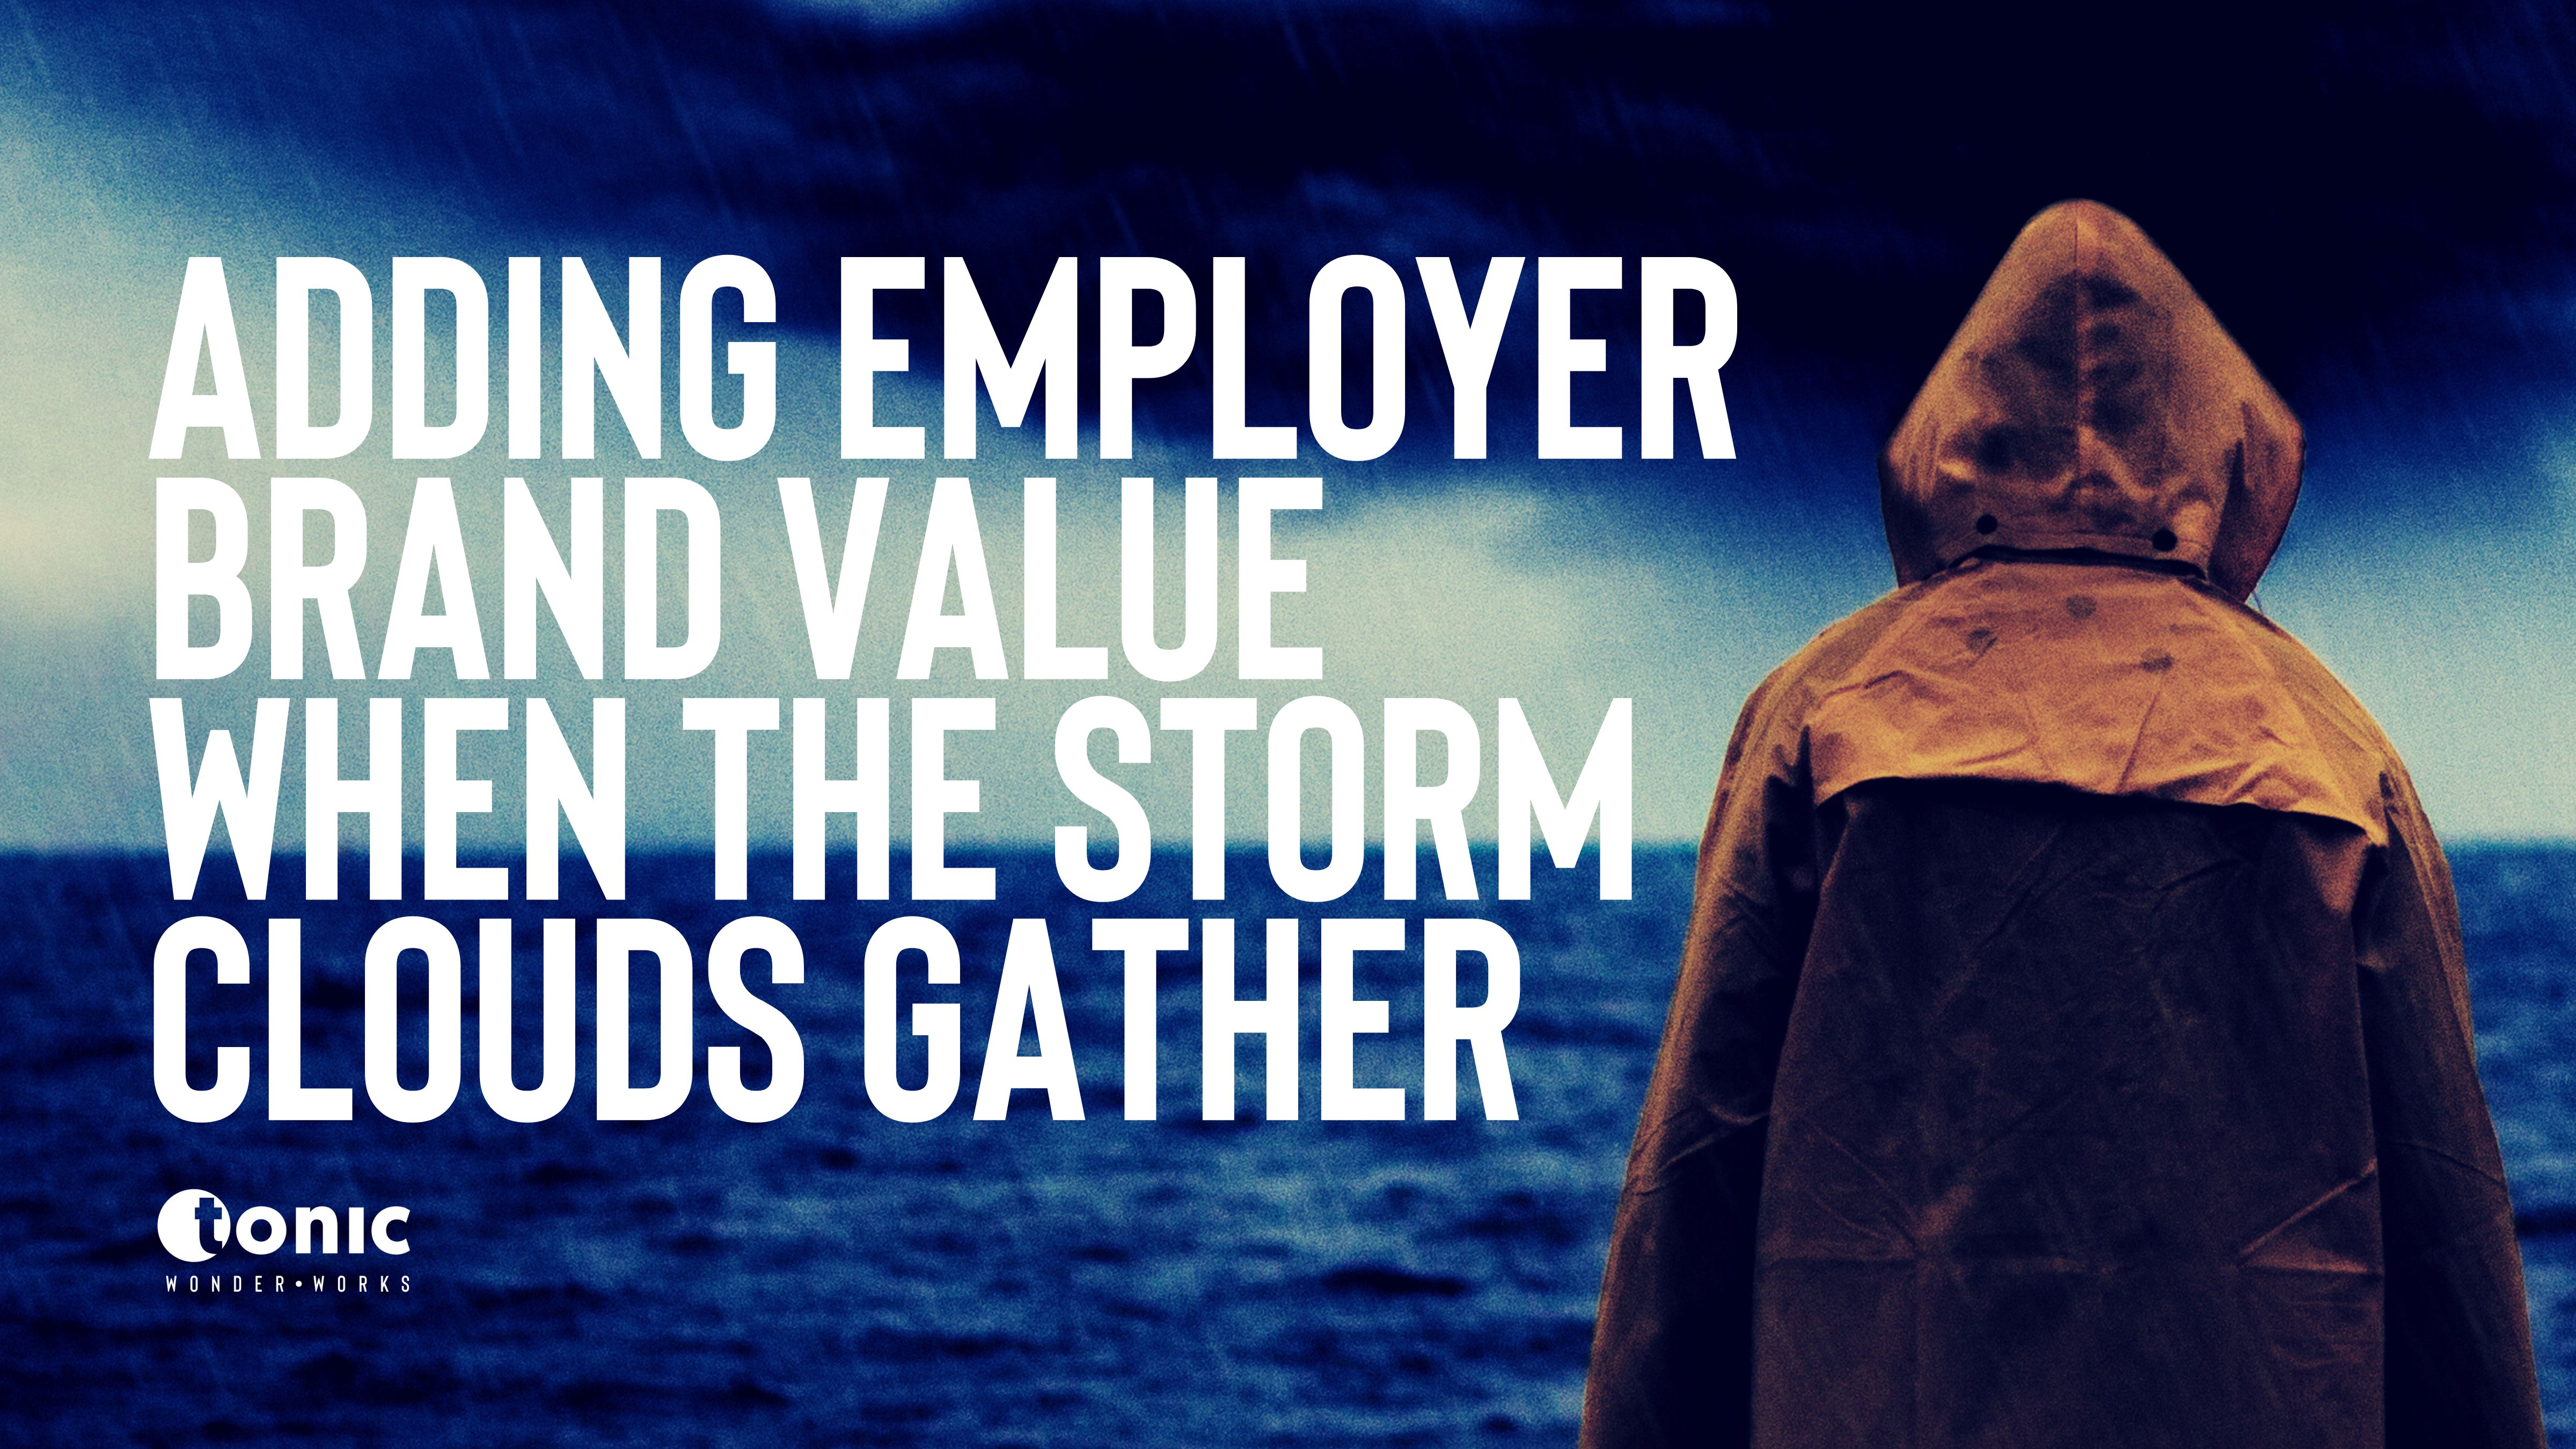 Adding Employer Brand value when the storm clouds gather